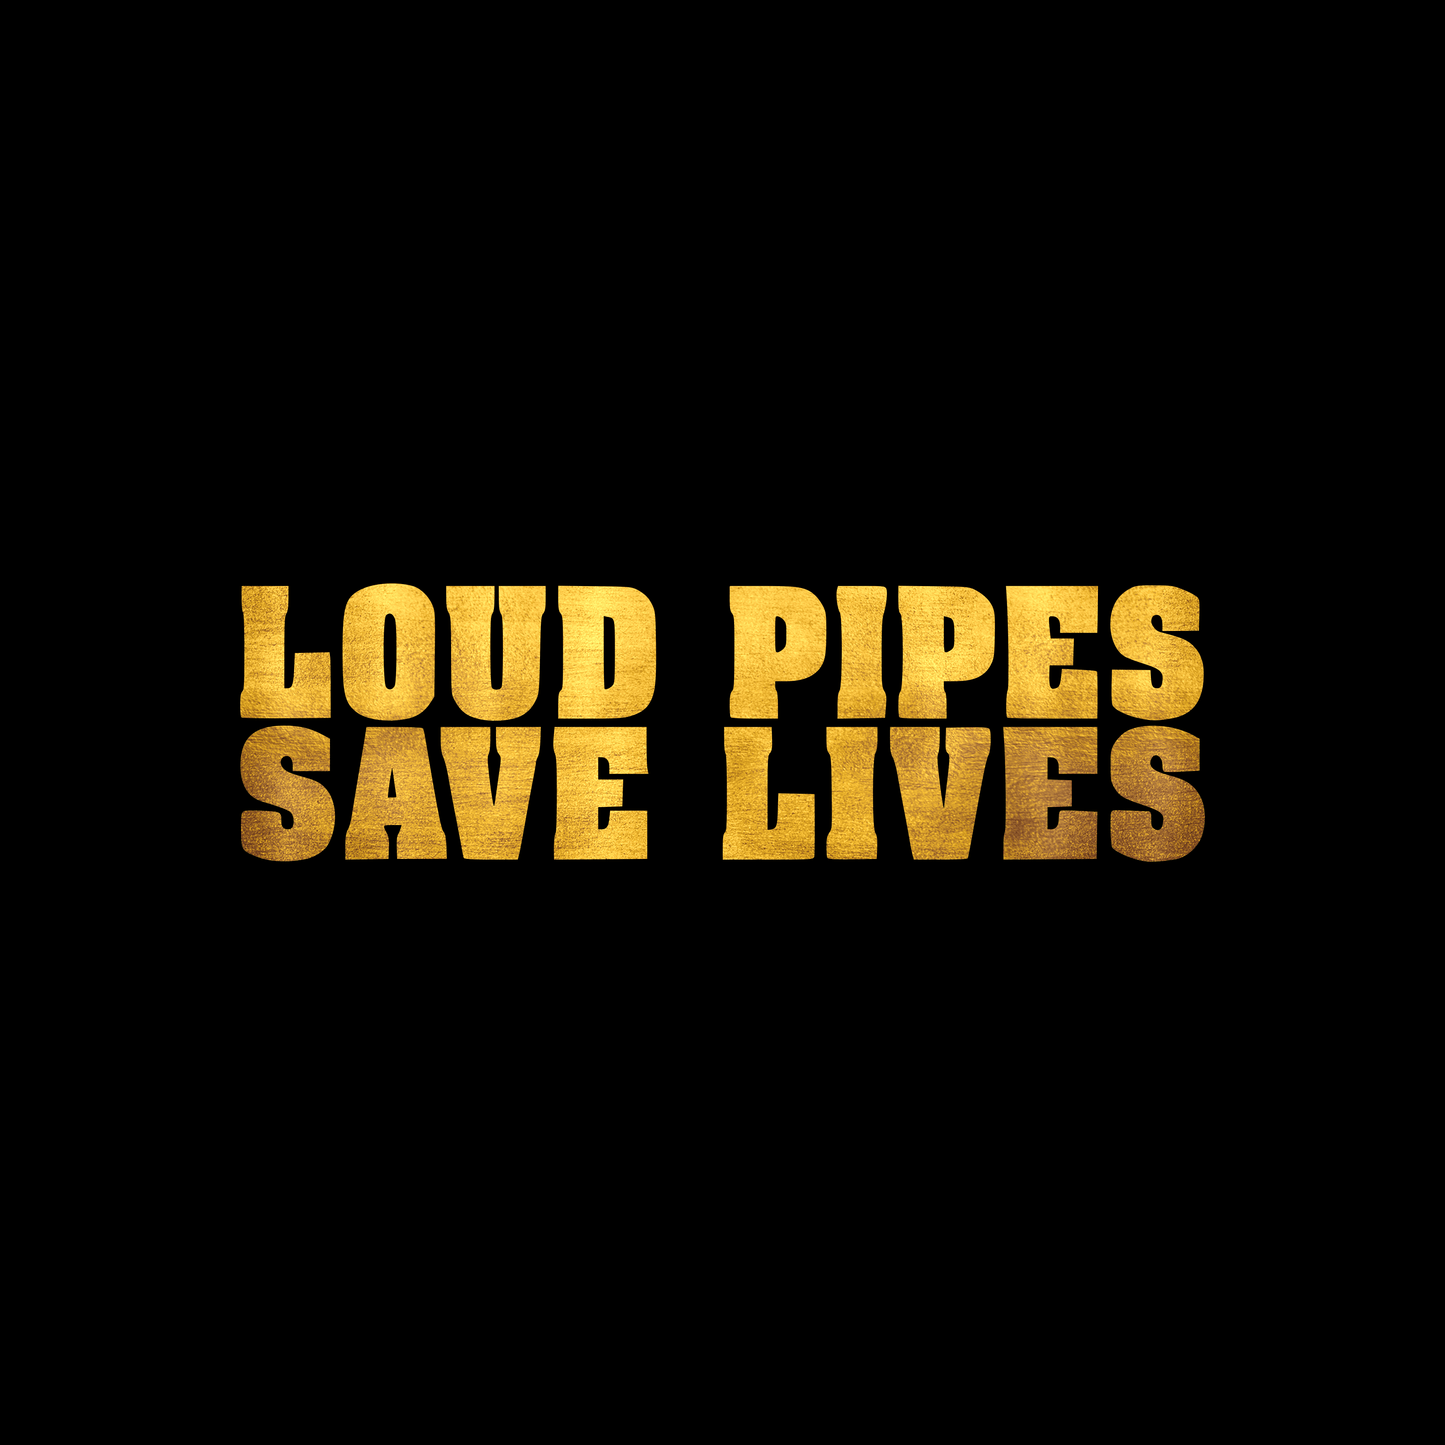 Loud pipes save lives sticker decal